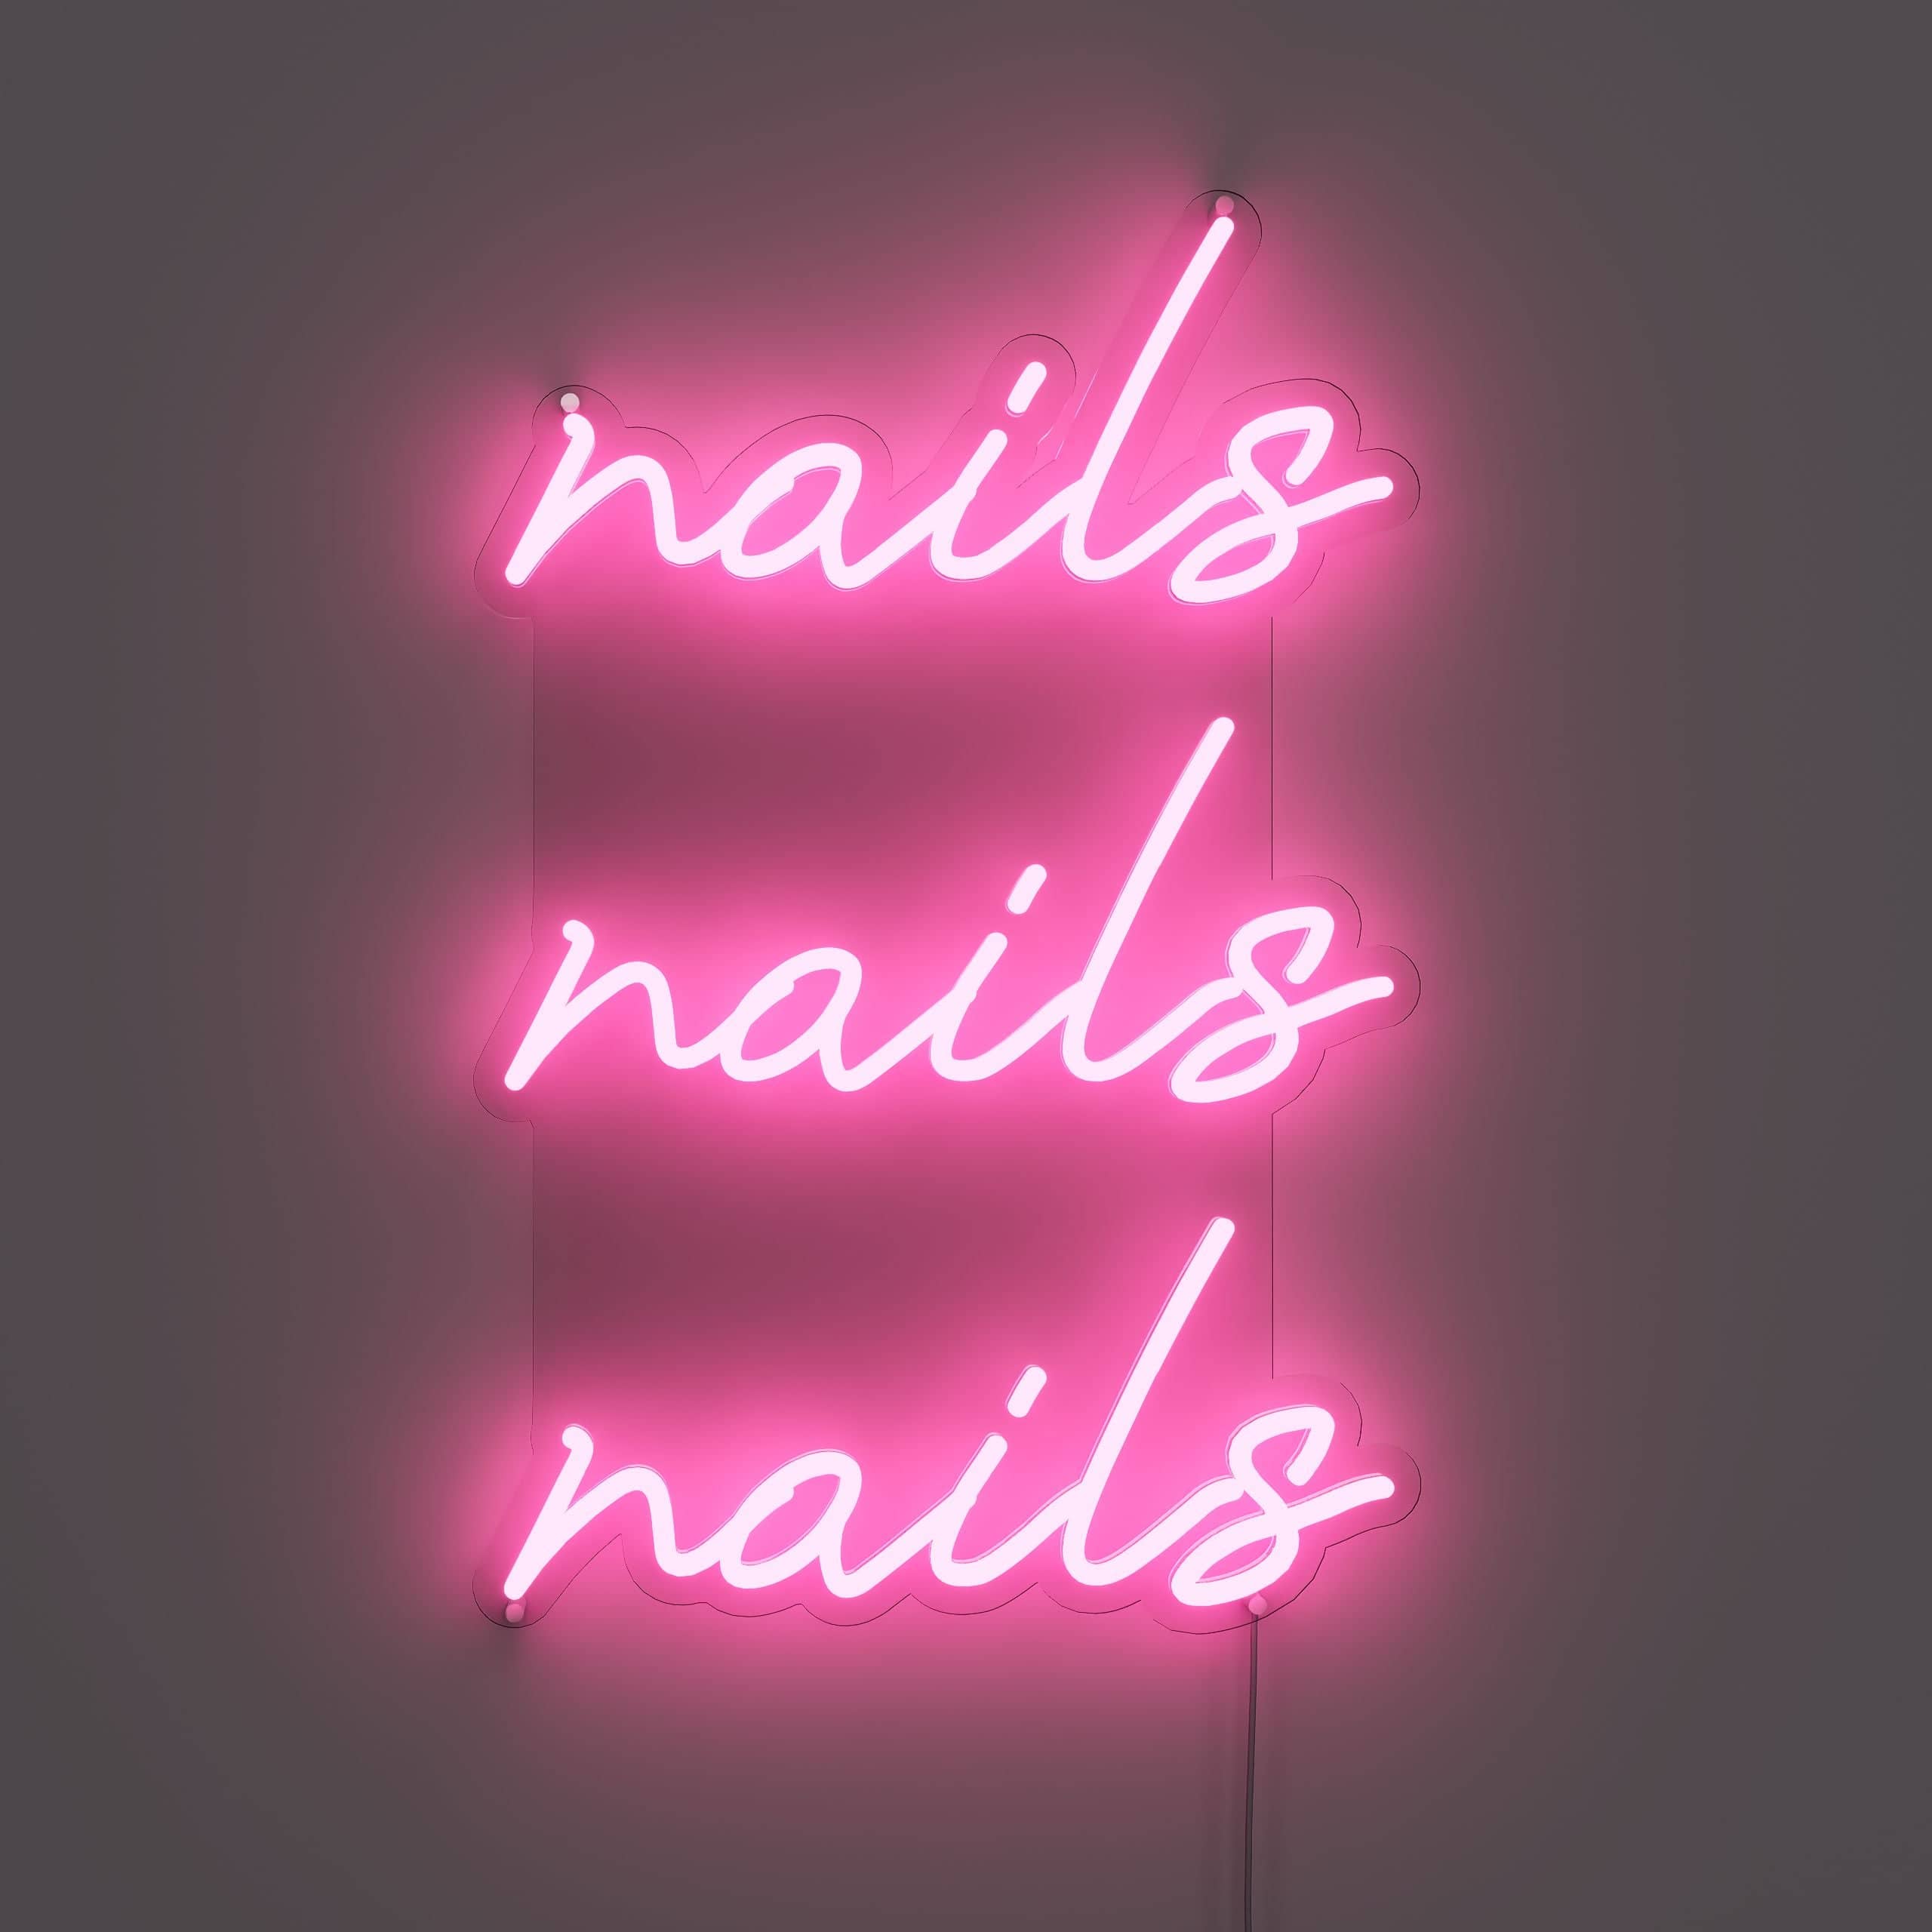 rocking-beautiful-nails-with-style!-neon-sign-lite